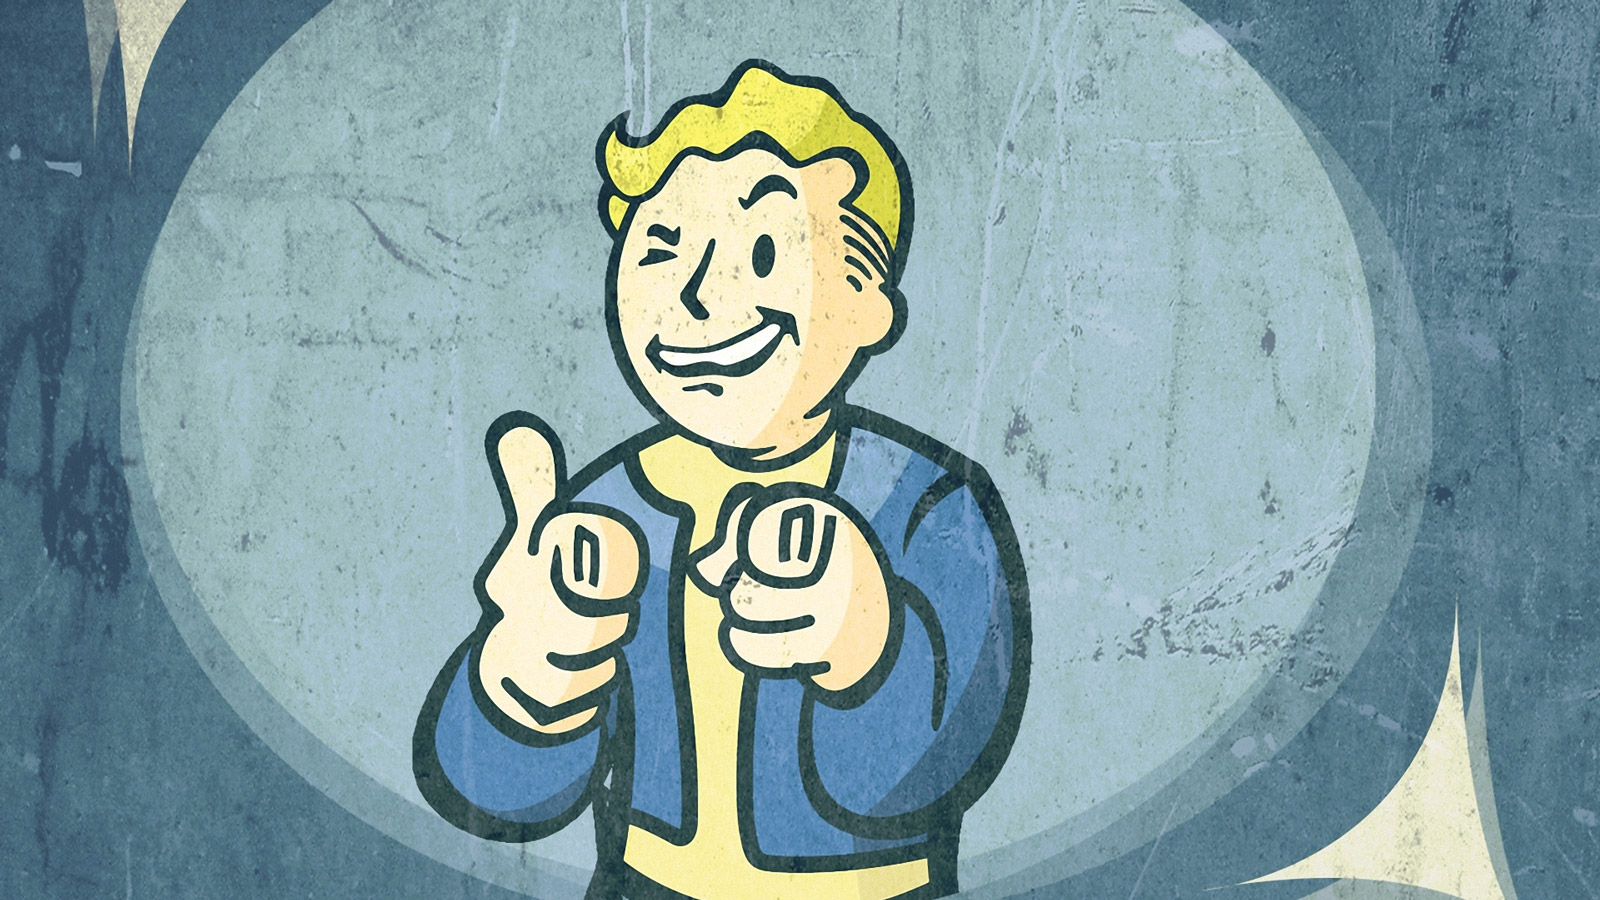 Rumor: “Fallout 4” To Be Revealed At E3 - No comment from Bethesda.  